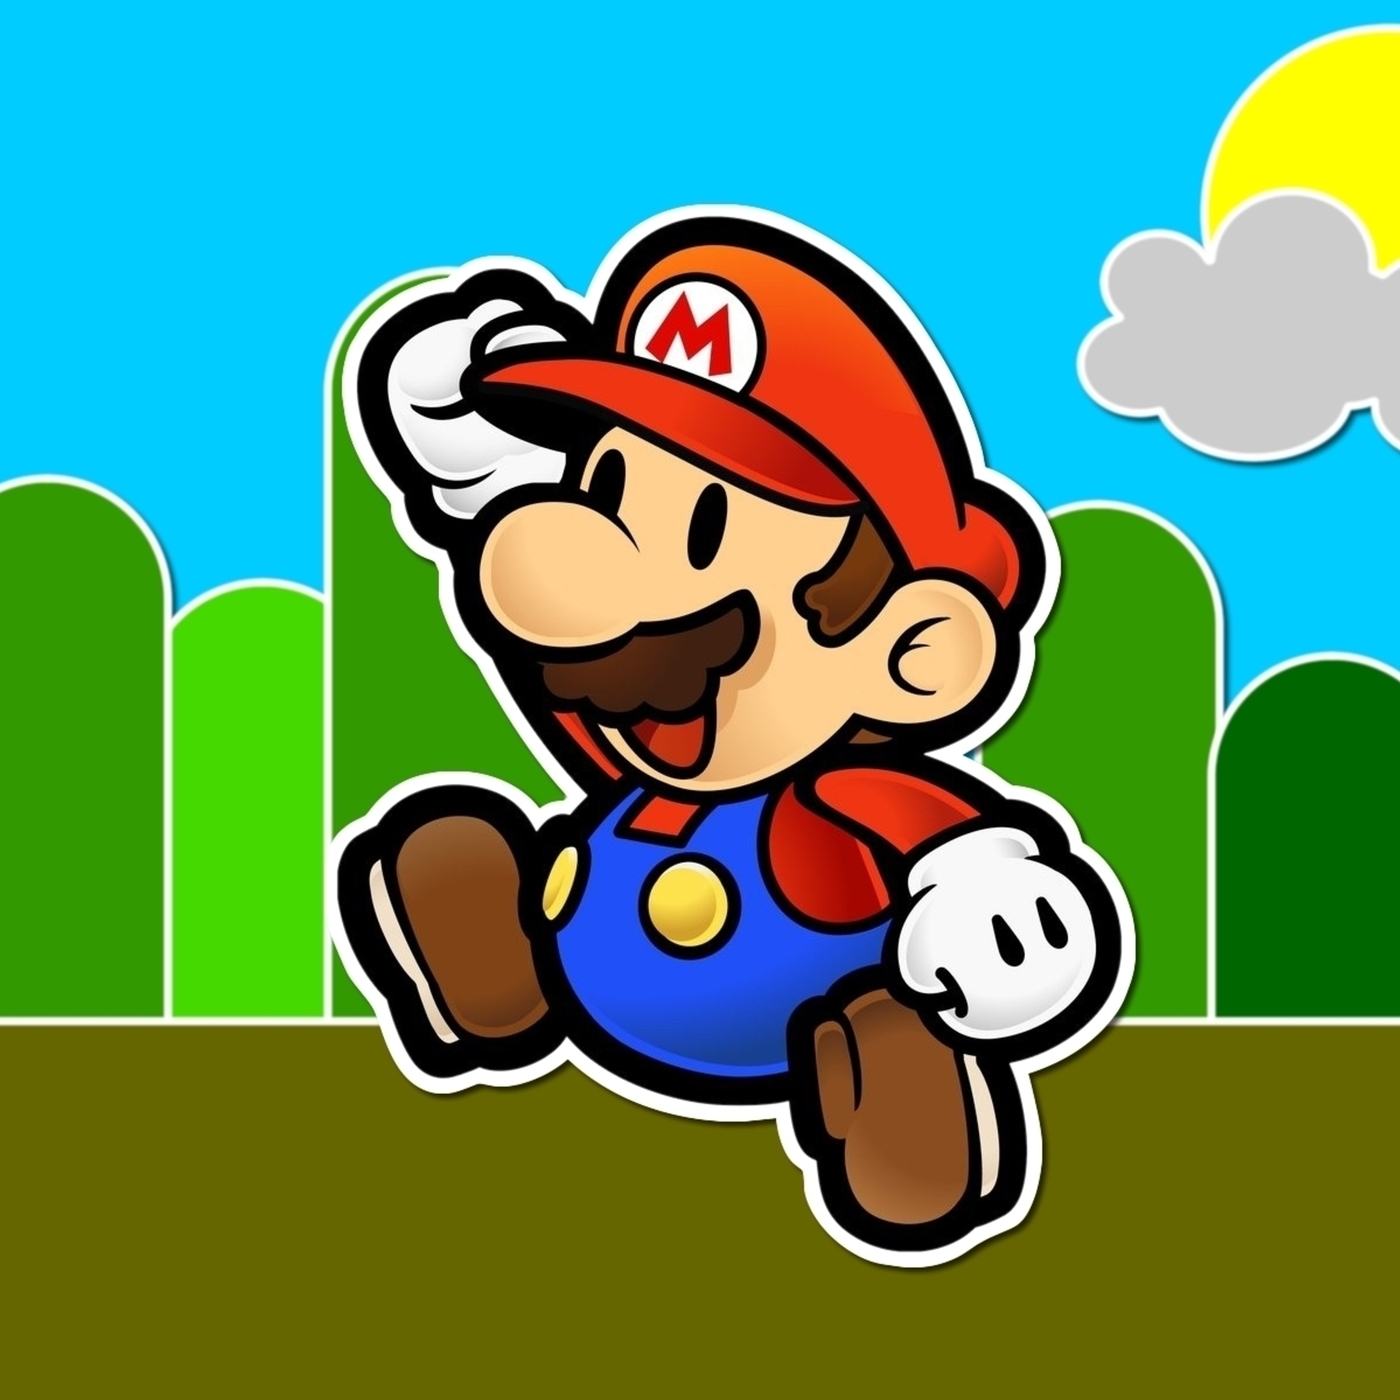 Watch Out for Fireballs! Episode 109: Paper Mario (Part 2)